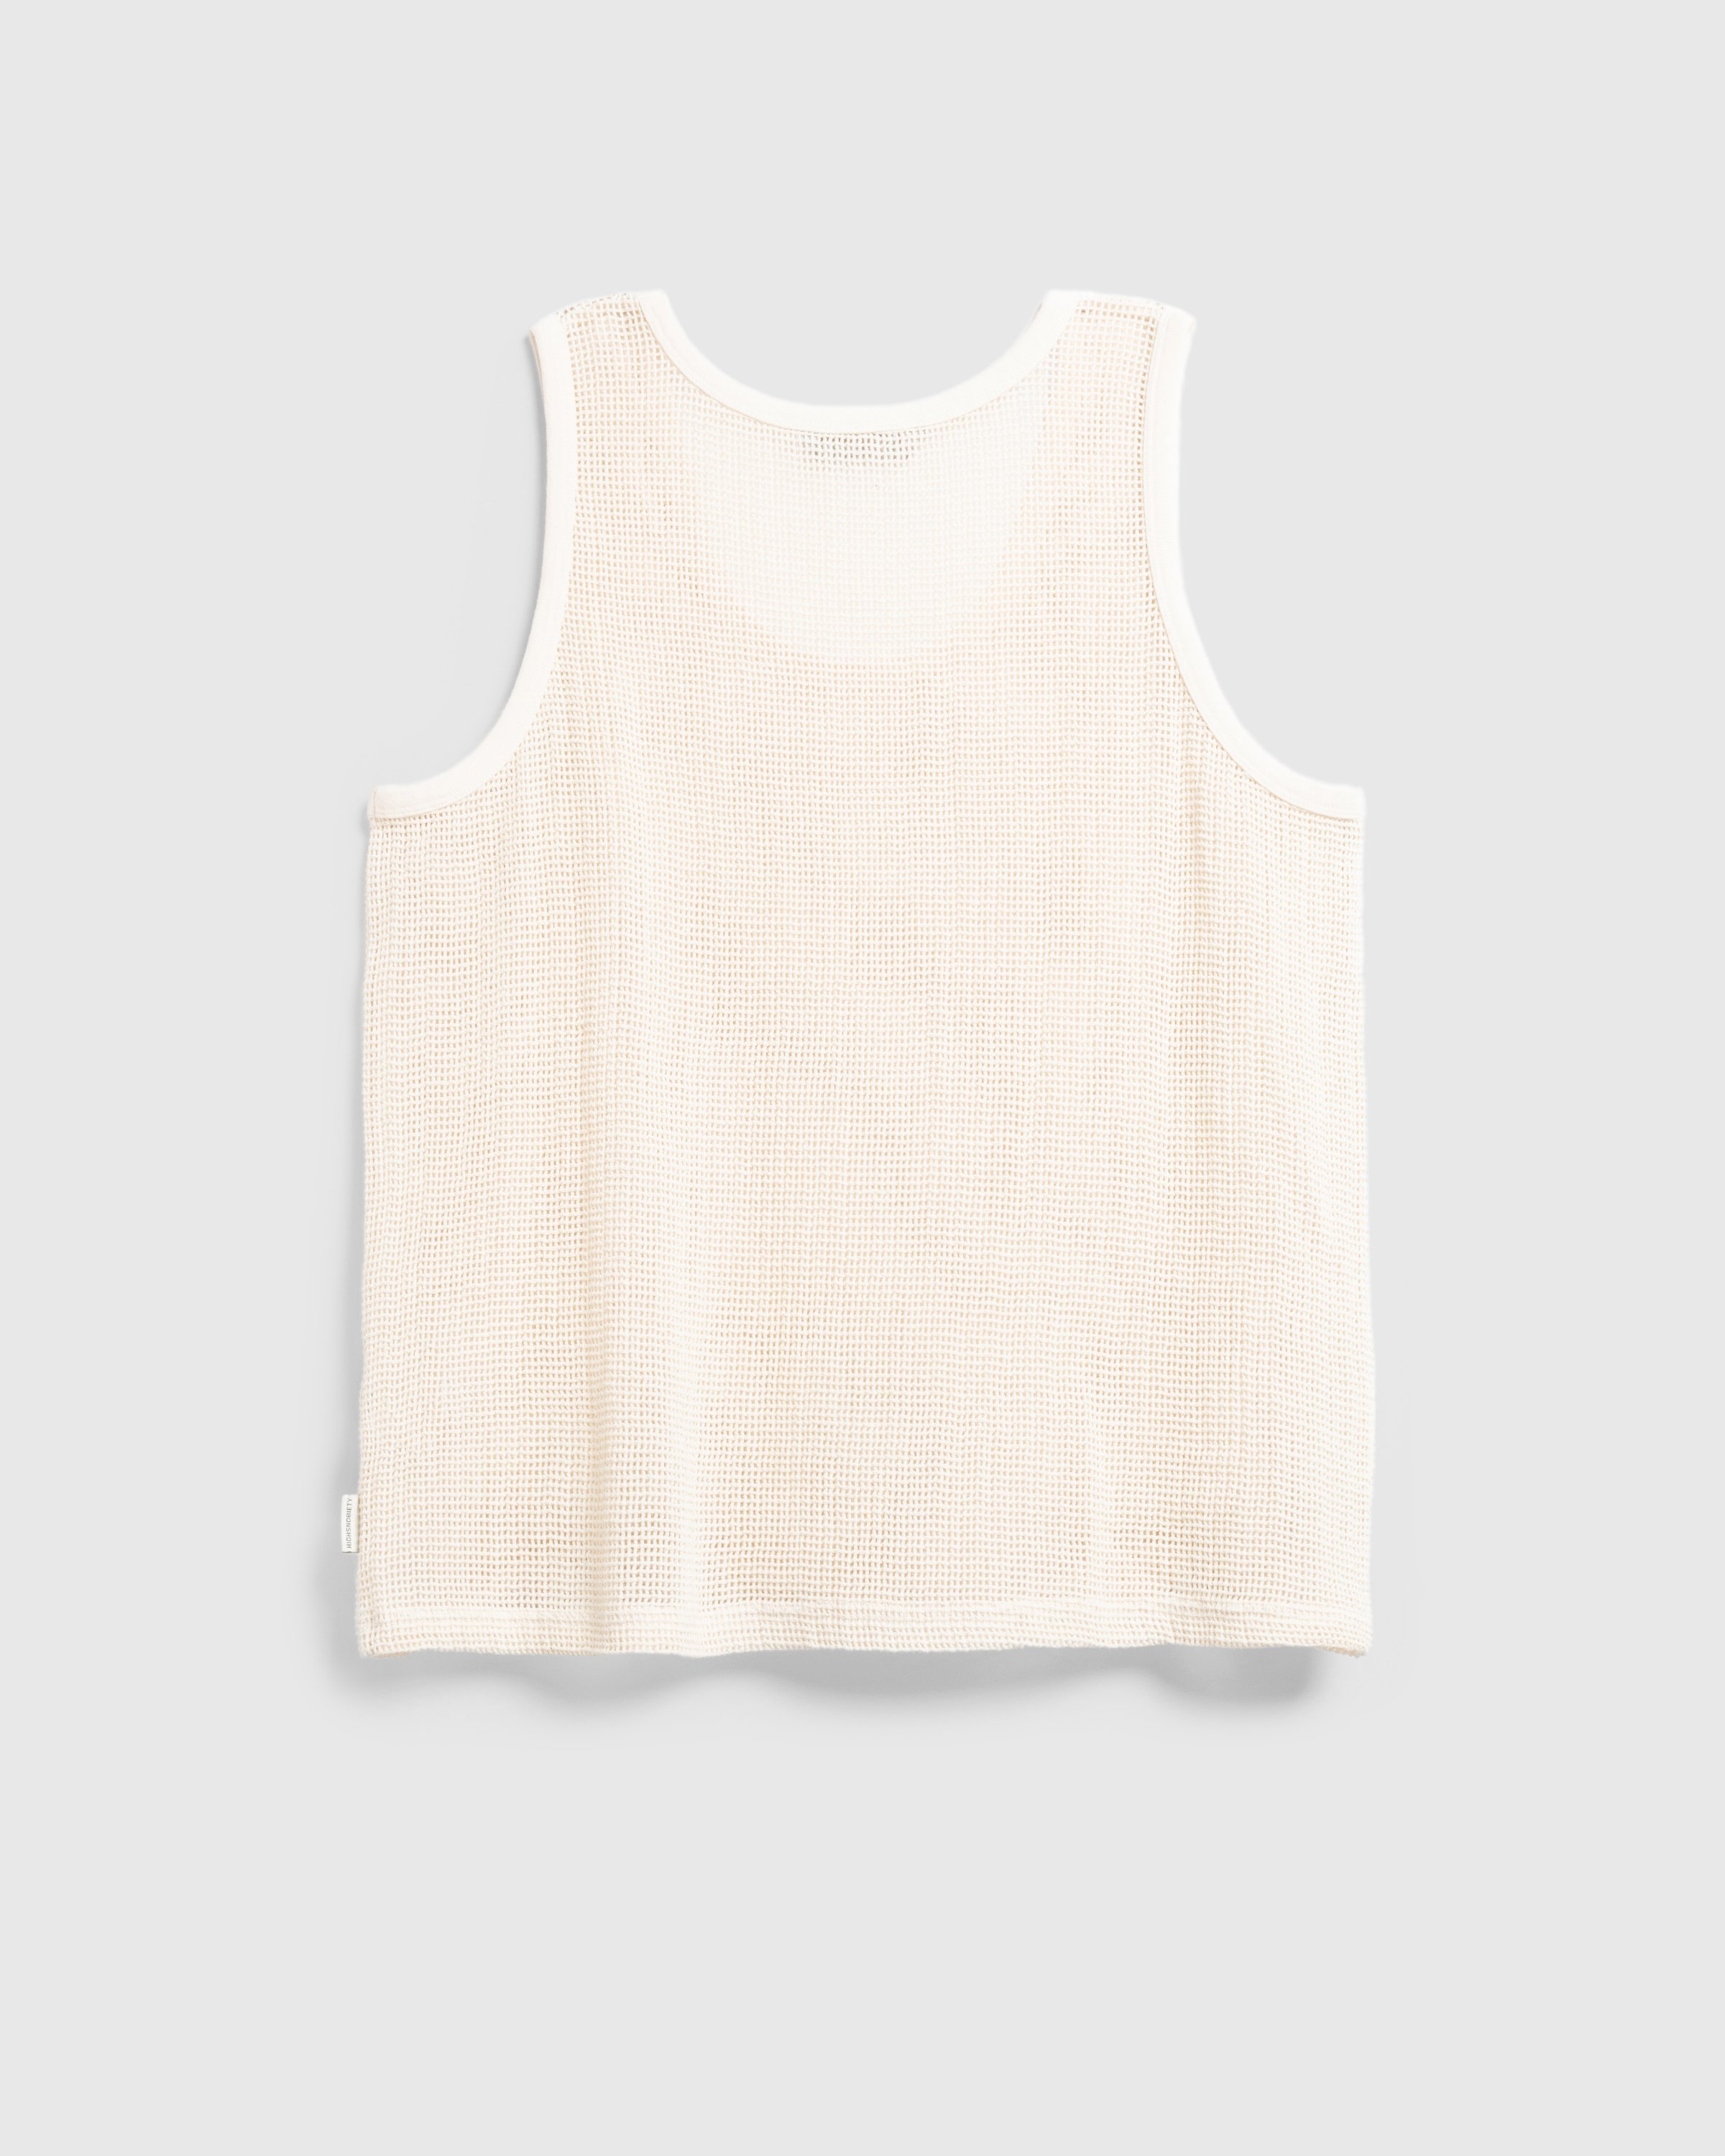 Highsnobiety HS05 - Pigment Dyed Cotton Mesh Tank Top - Clothing -  - Image 2